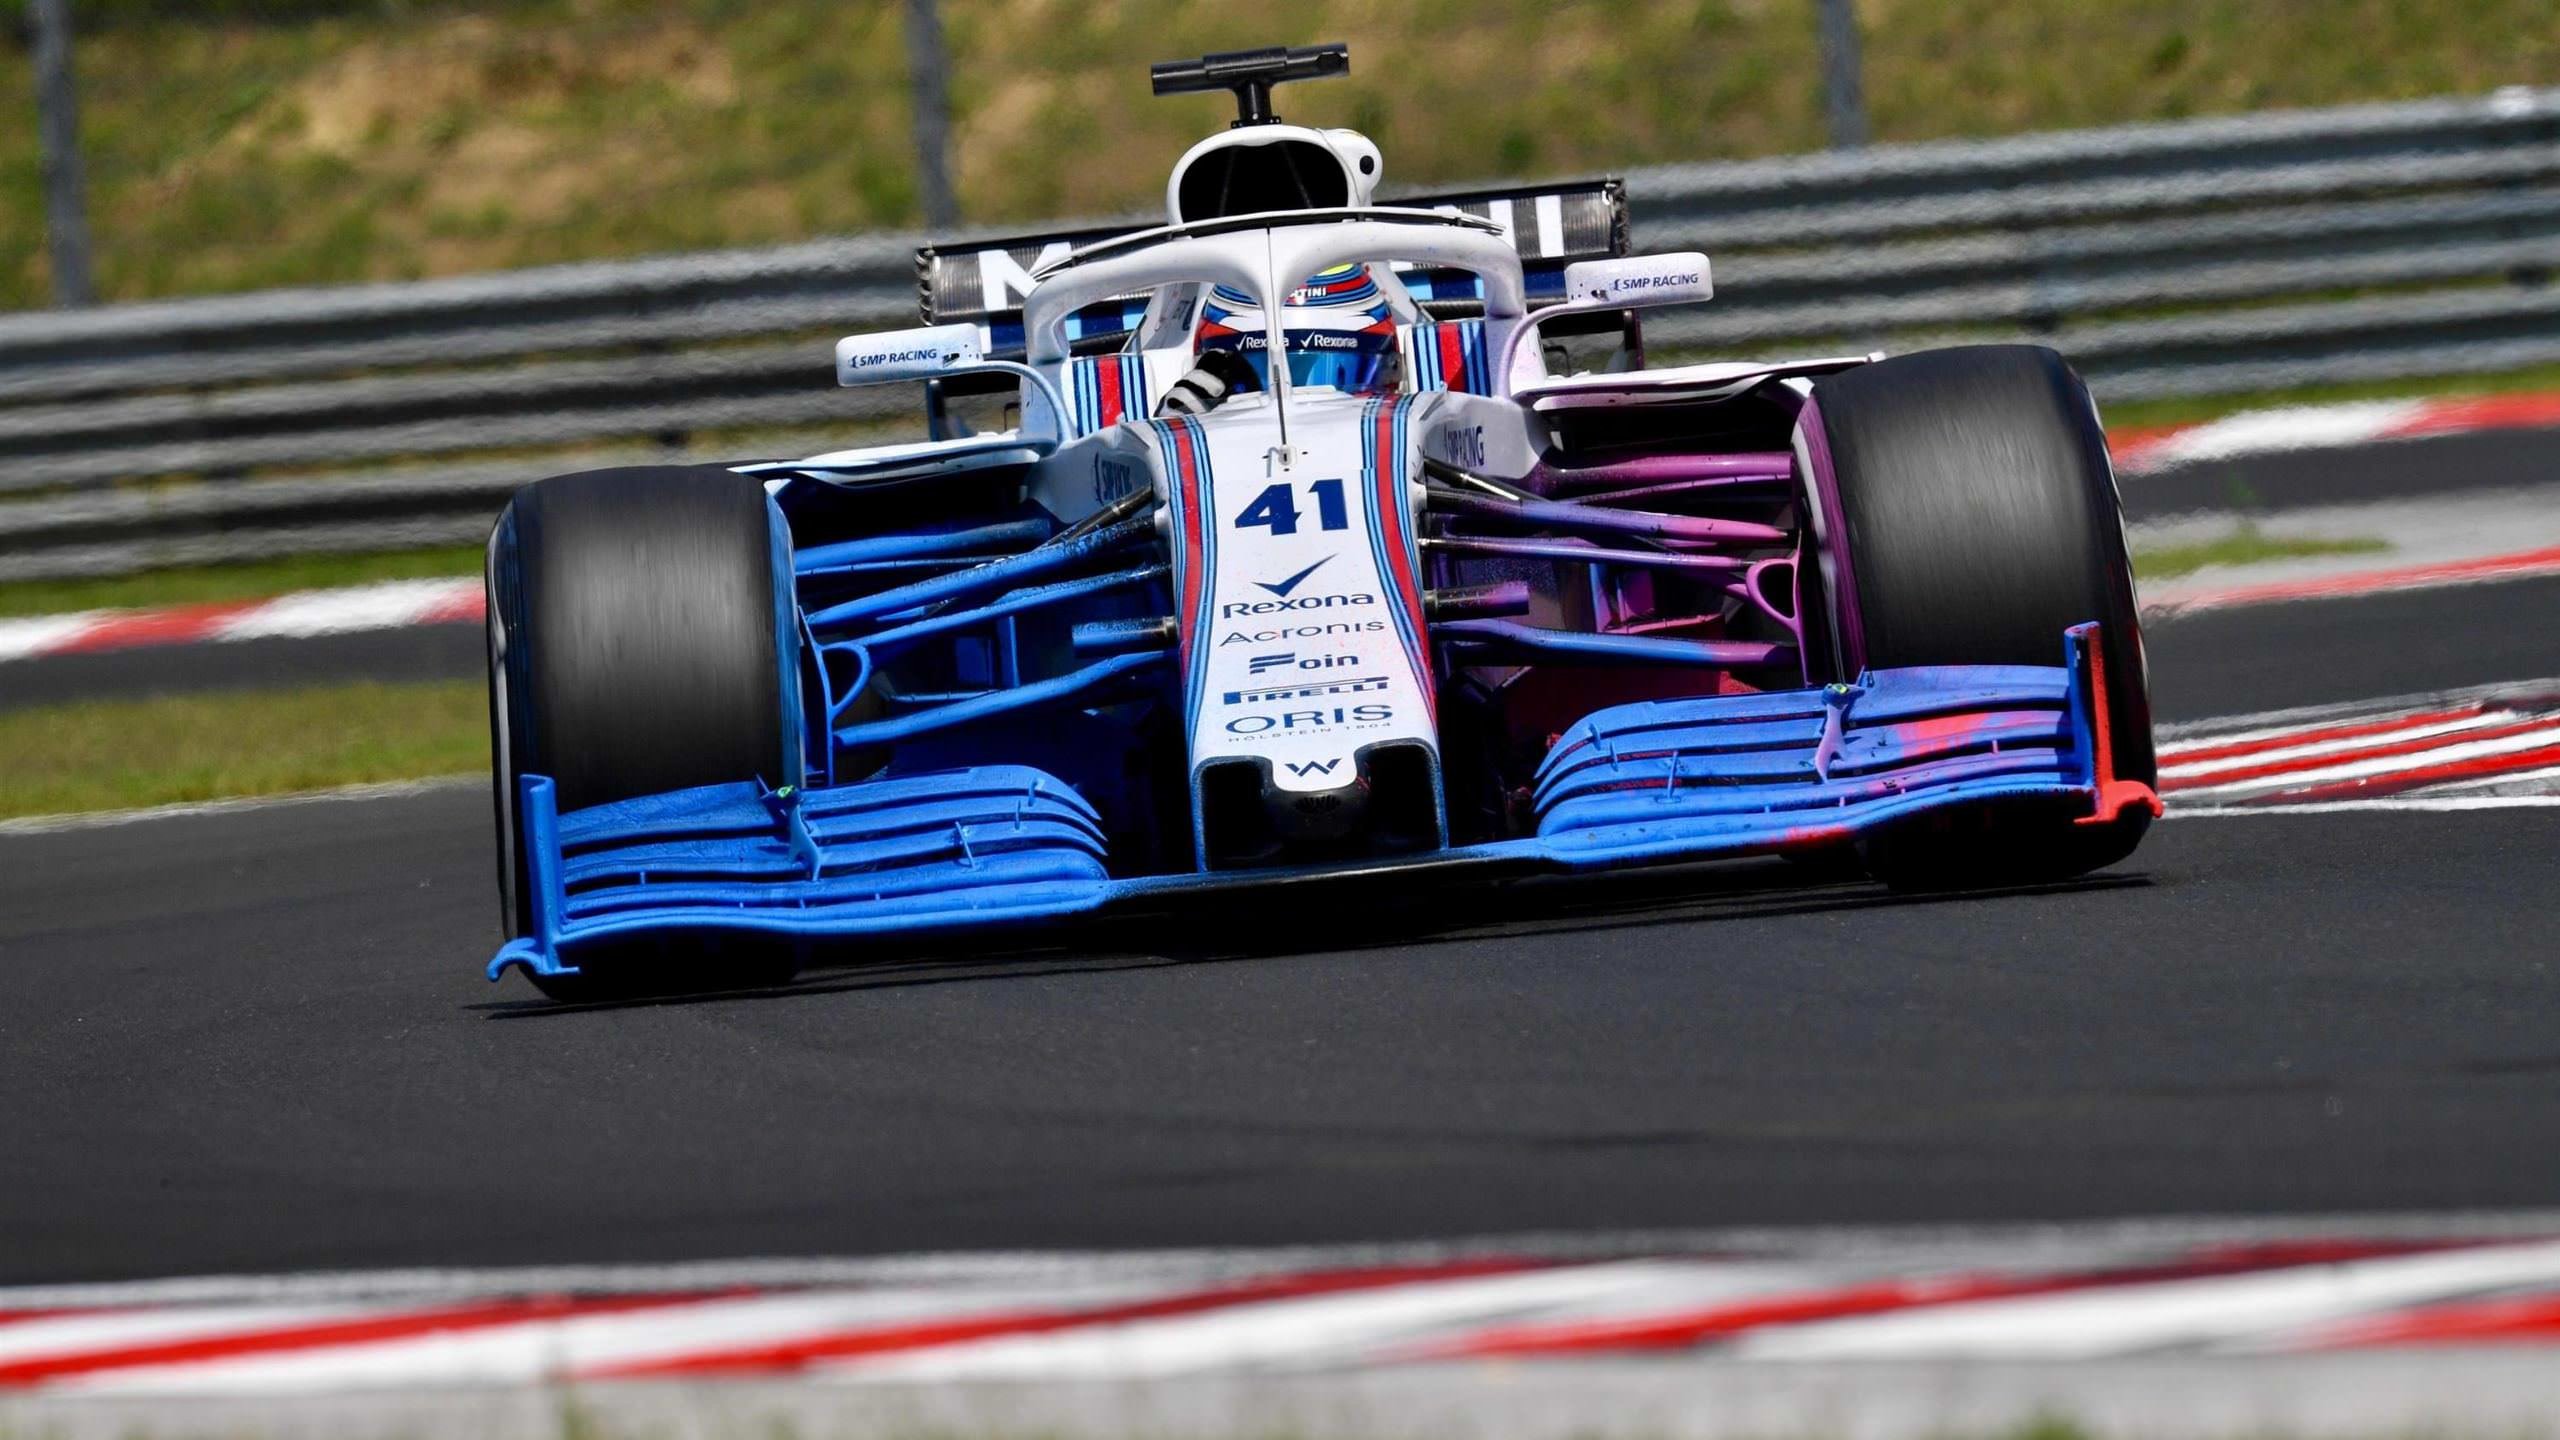 Williams Testing Spec Front Wing - F1 2019 Cars Williams , HD Wallpaper & Backgrounds